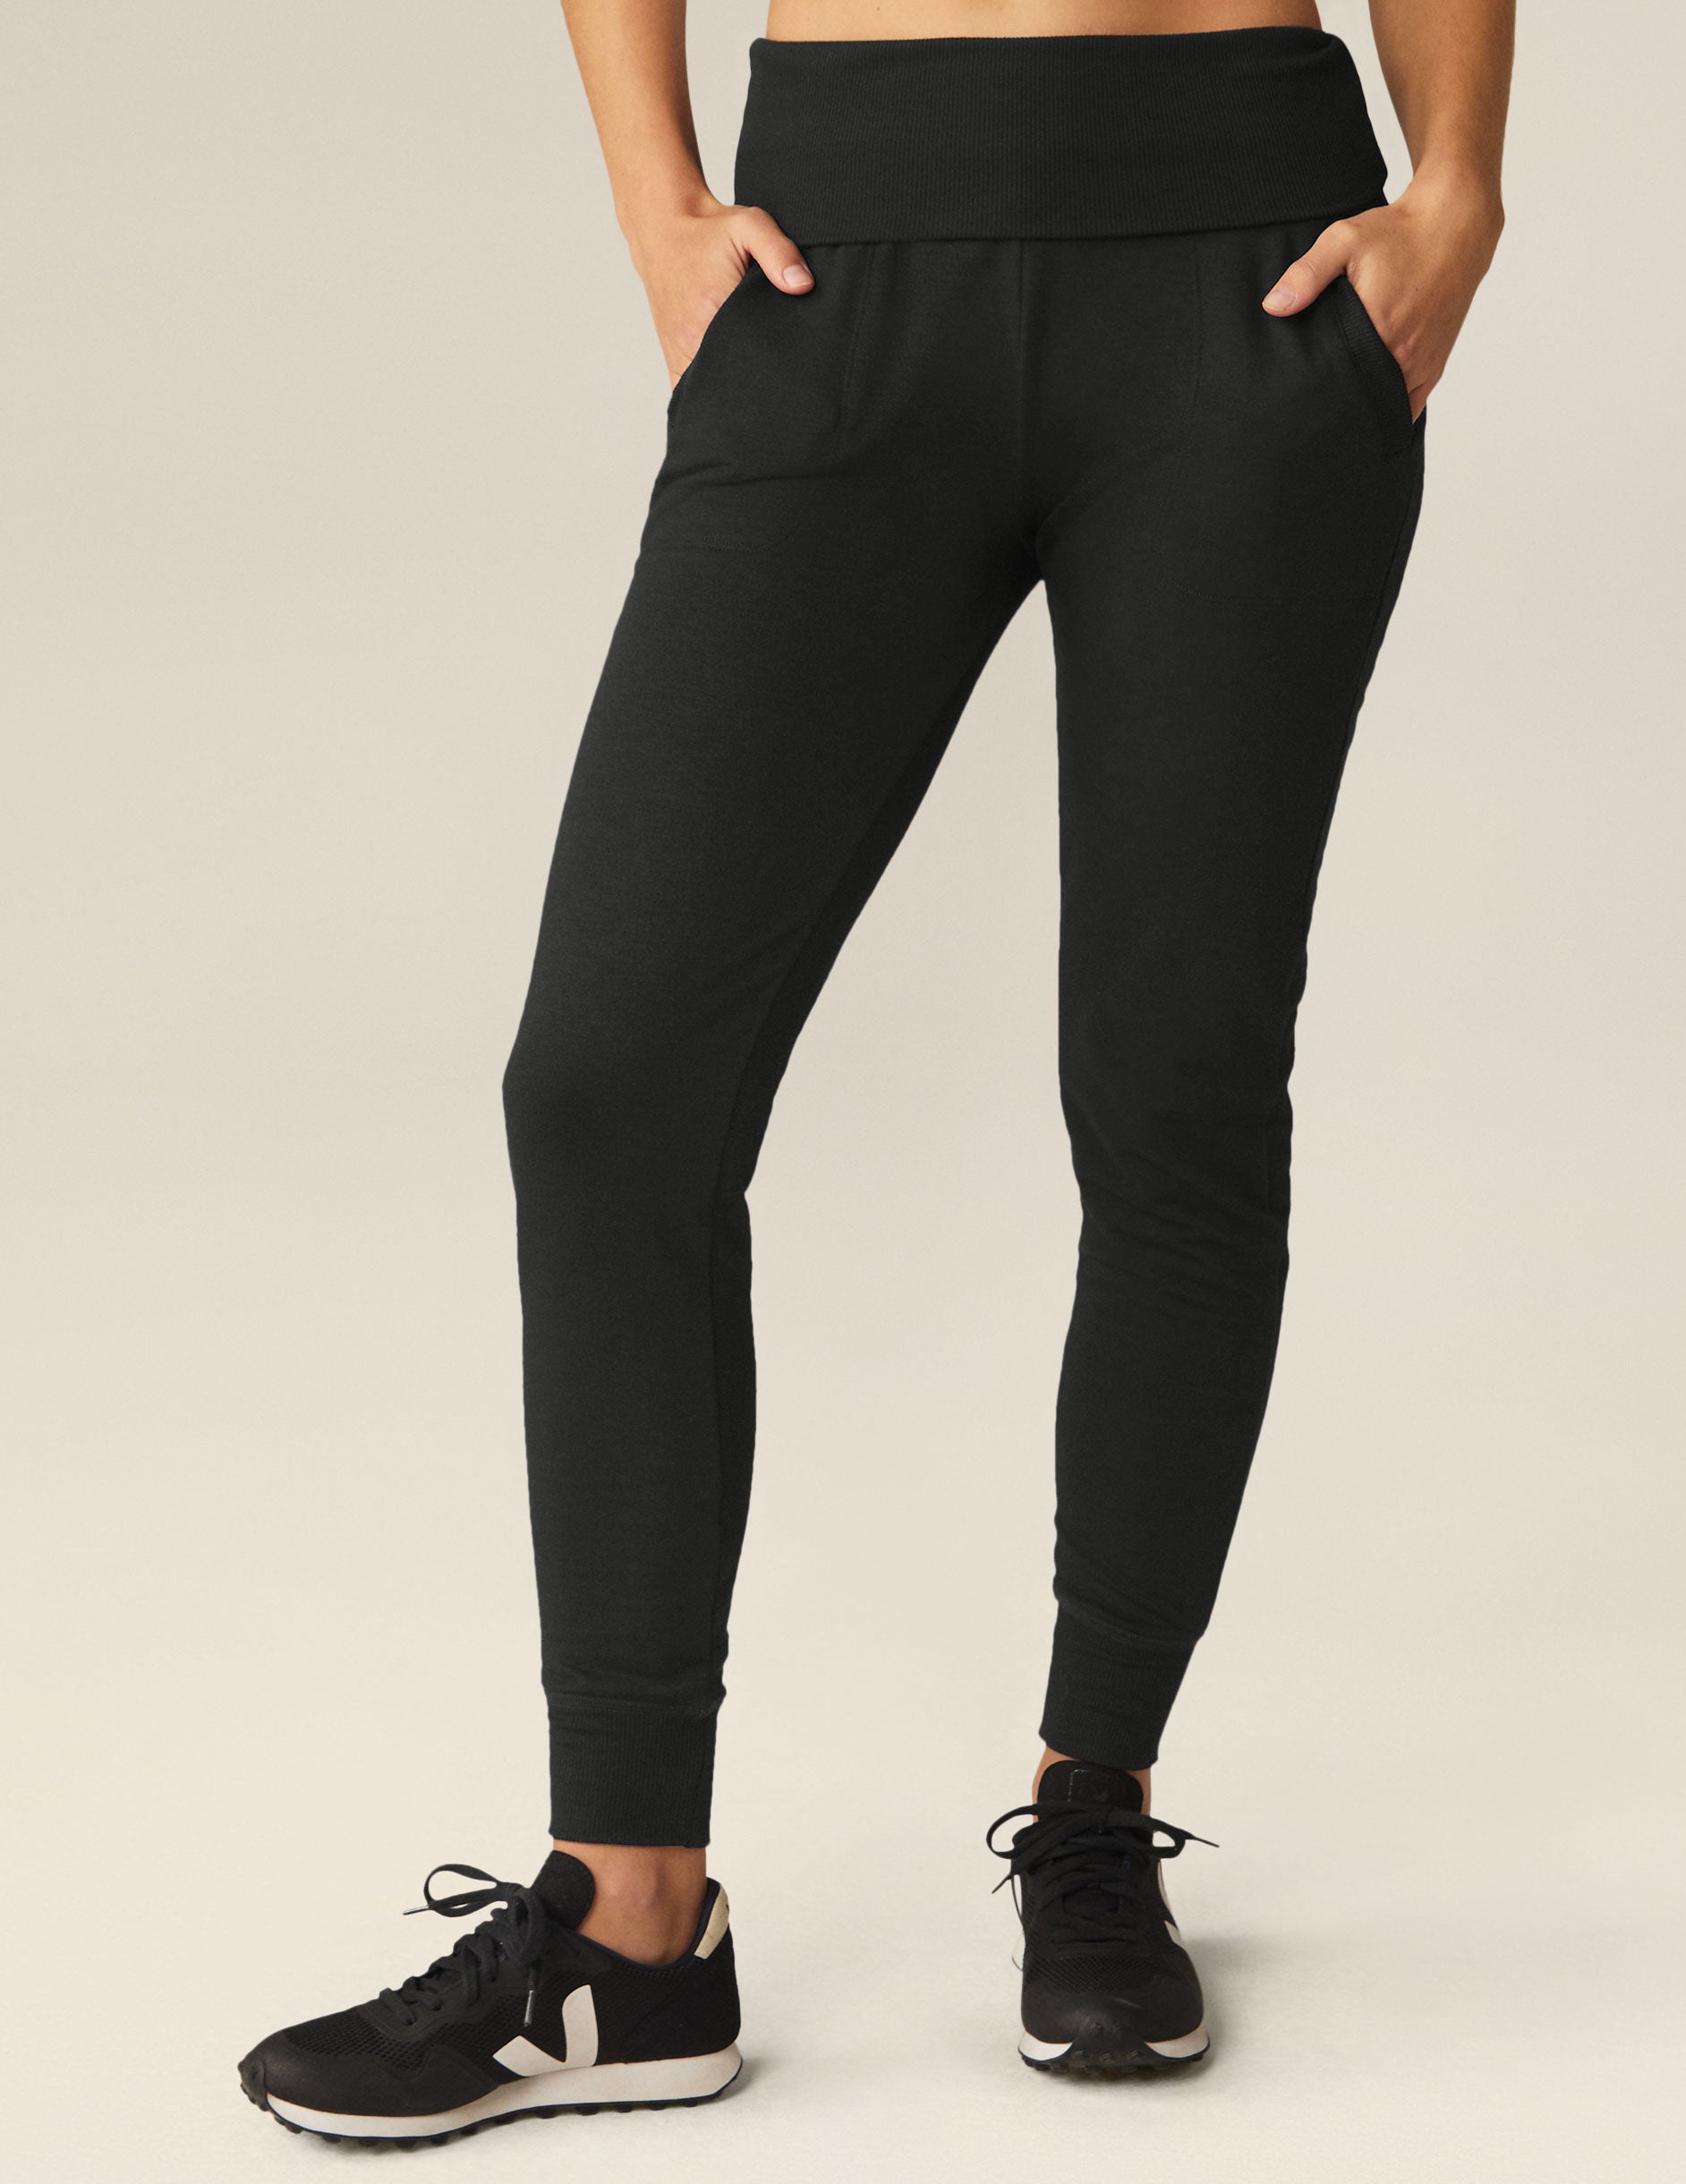 Women's Perfectly Cozy Lounge Jogger Pants - Stars Above™ Light